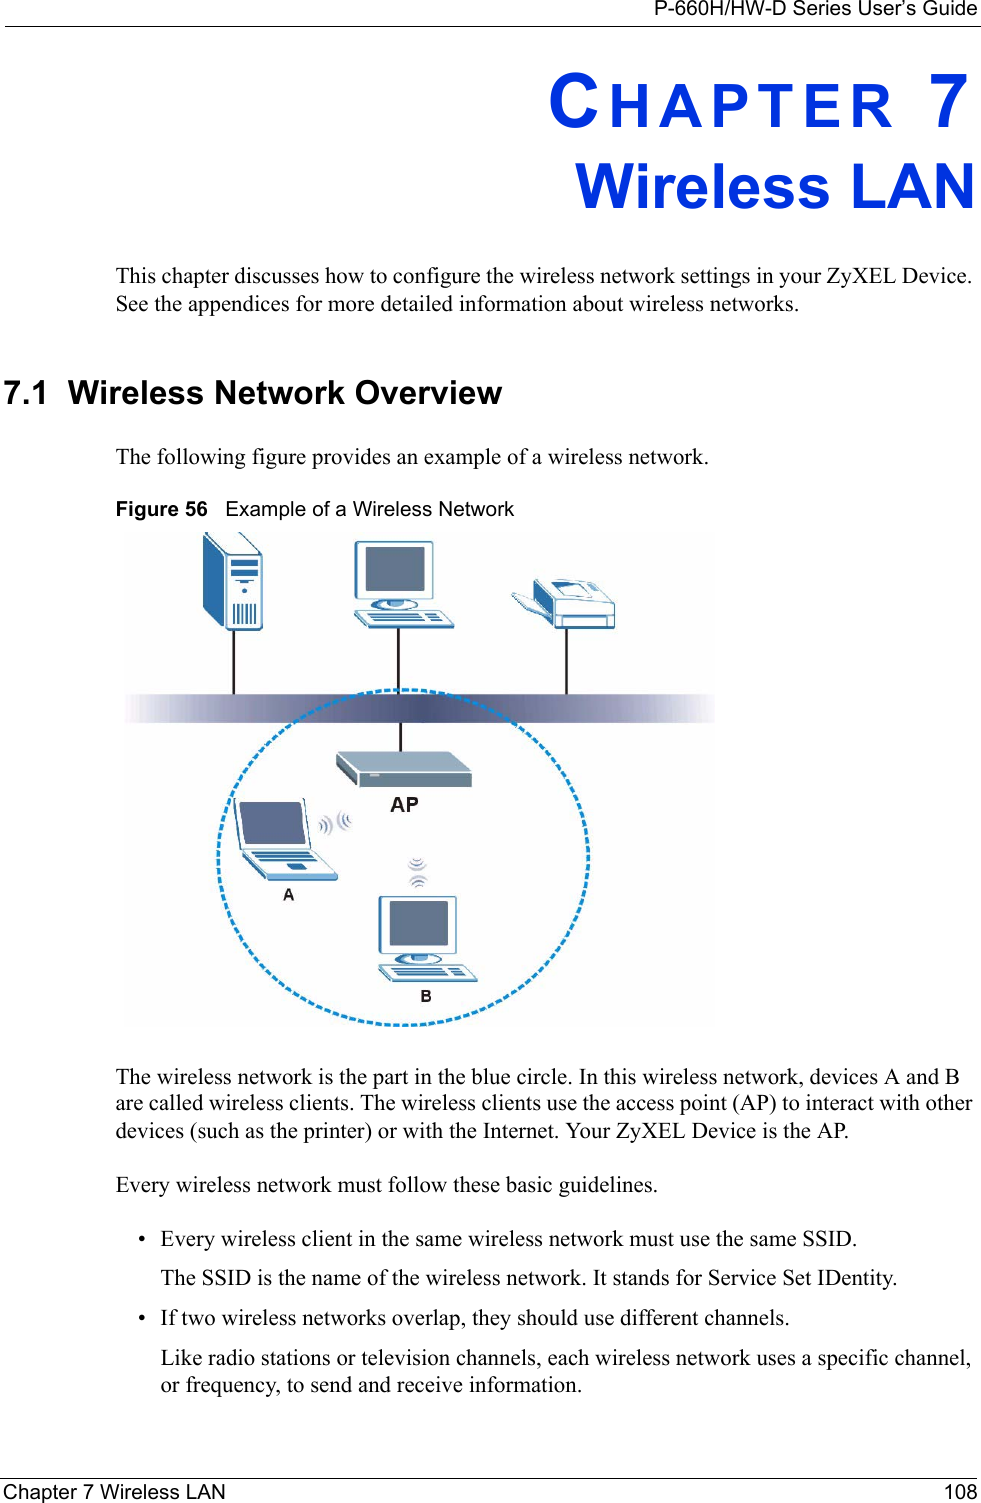 P-660H/HW-D Series User’s GuideChapter 7 Wireless LAN 108CHAPTER 7Wireless LANThis chapter discusses how to configure the wireless network settings in your ZyXEL Device. See the appendices for more detailed information about wireless networks.7.1  Wireless Network OverviewThe following figure provides an example of a wireless network.Figure 56   Example of a Wireless NetworkThe wireless network is the part in the blue circle. In this wireless network, devices A and B are called wireless clients. The wireless clients use the access point (AP) to interact with other devices (such as the printer) or with the Internet. Your ZyXEL Device is the AP.Every wireless network must follow these basic guidelines.• Every wireless client in the same wireless network must use the same SSID.The SSID is the name of the wireless network. It stands for Service Set IDentity.• If two wireless networks overlap, they should use different channels.Like radio stations or television channels, each wireless network uses a specific channel, or frequency, to send and receive information.